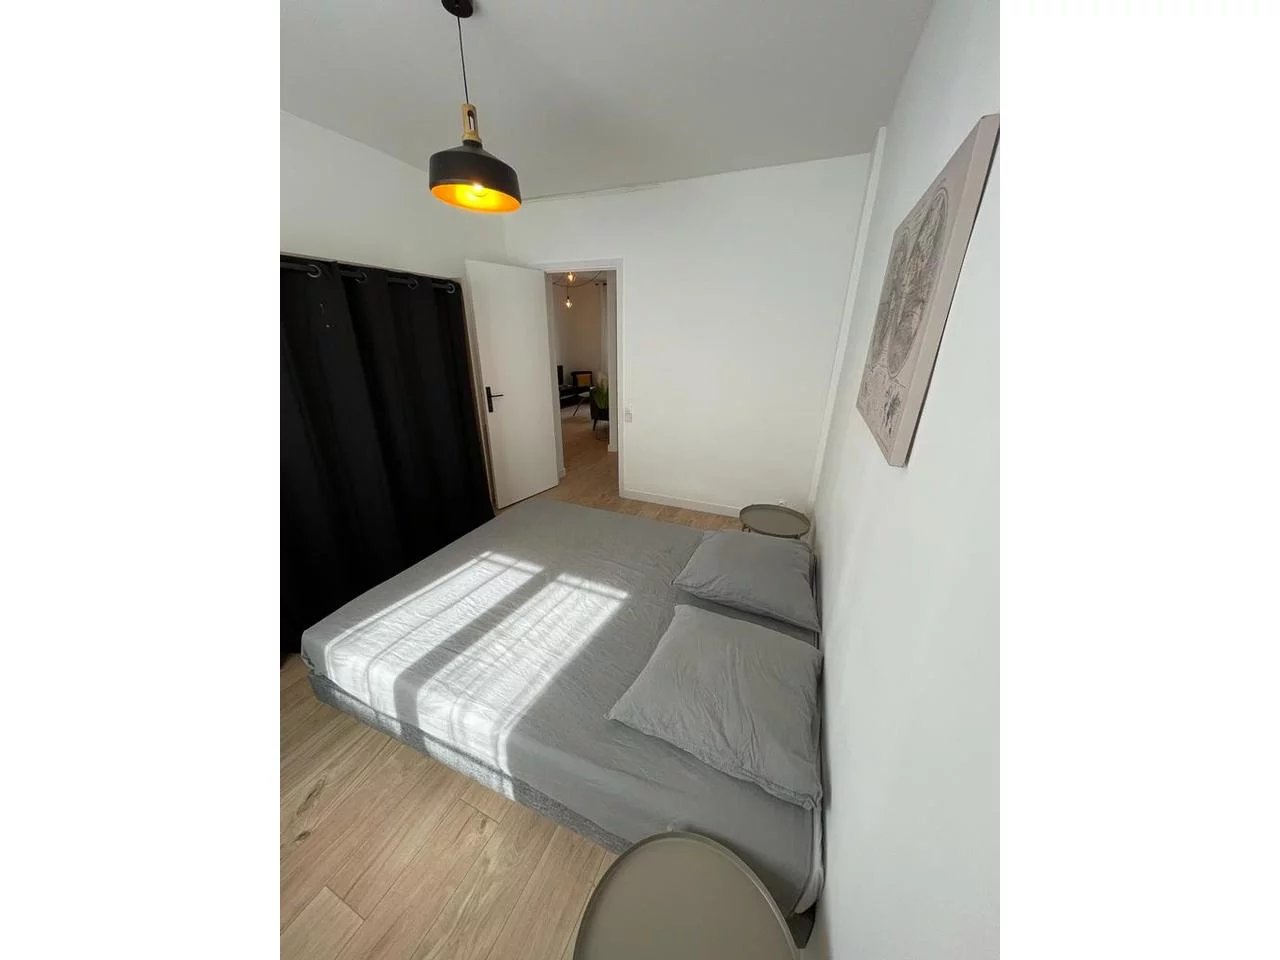 Appartement  3 Rooms 53m2  for sale   233 000 €